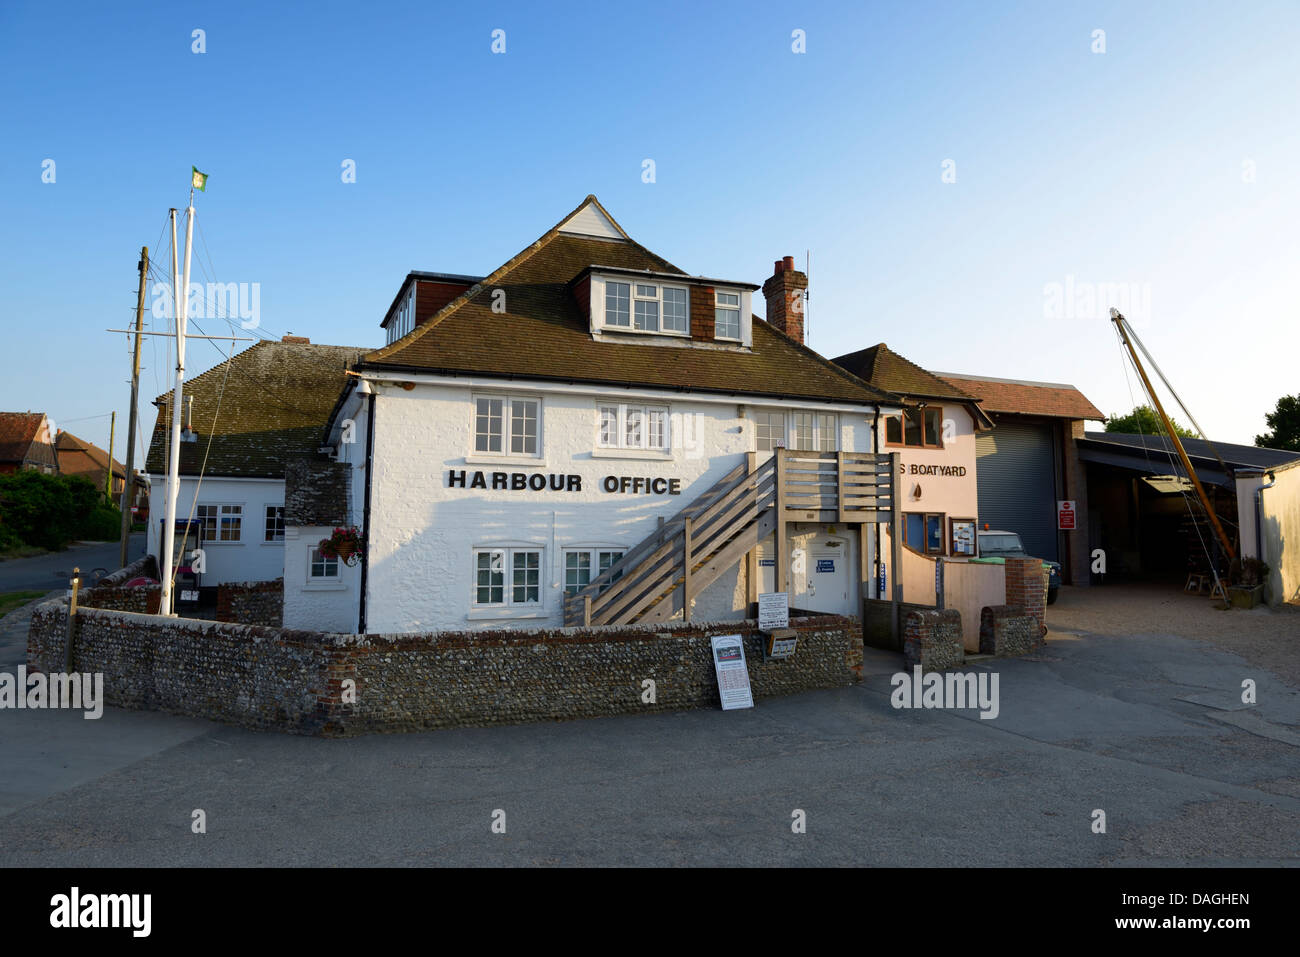 The Harbour office, West Itchenor, West Sussex, UK Stock Photo